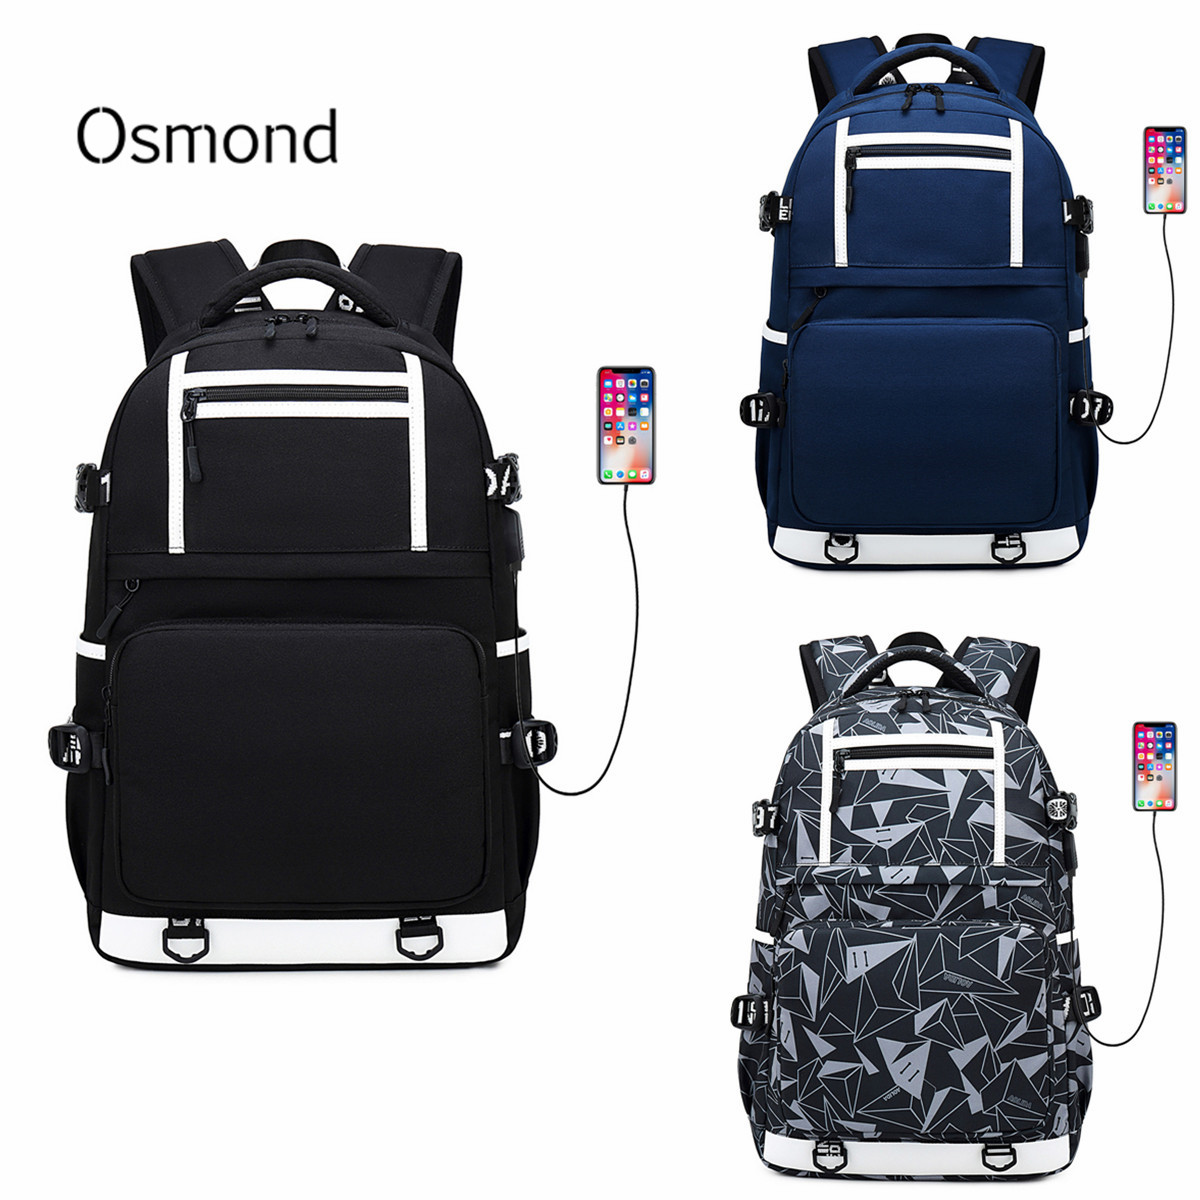 Oxford-Cloth-Waterproof-Laptop-Bag-Backpack-Travel-Bag-With-External-USB-Charging-Port-1509426-1